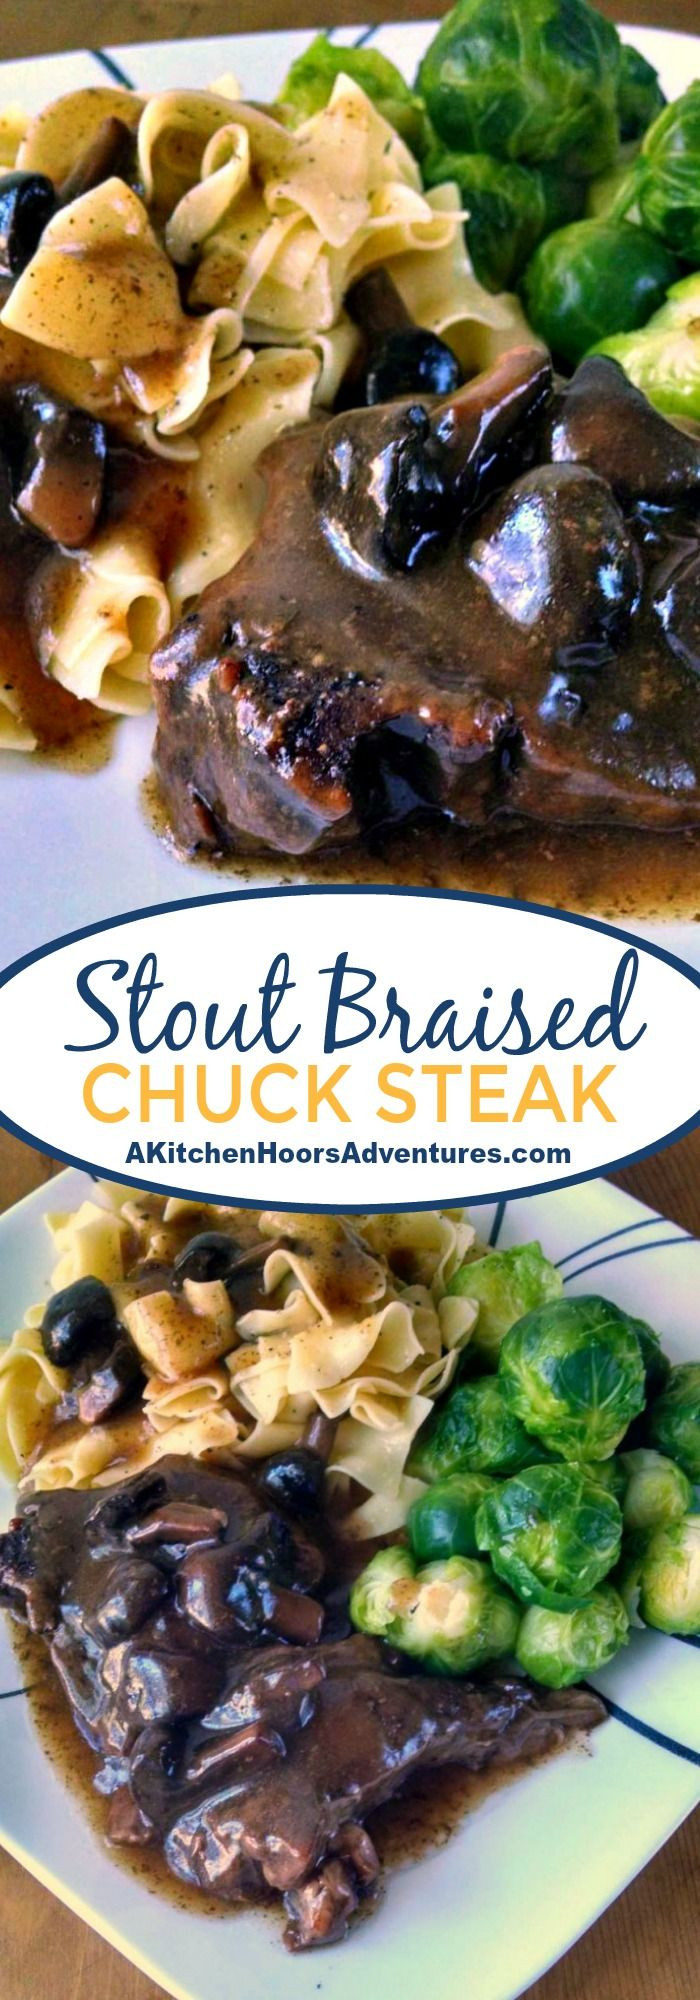 Beef Chuck Steak Recipes Slow Cooker
 Slow Cooker Stout Braised Chuck Steak has a rich flavor to